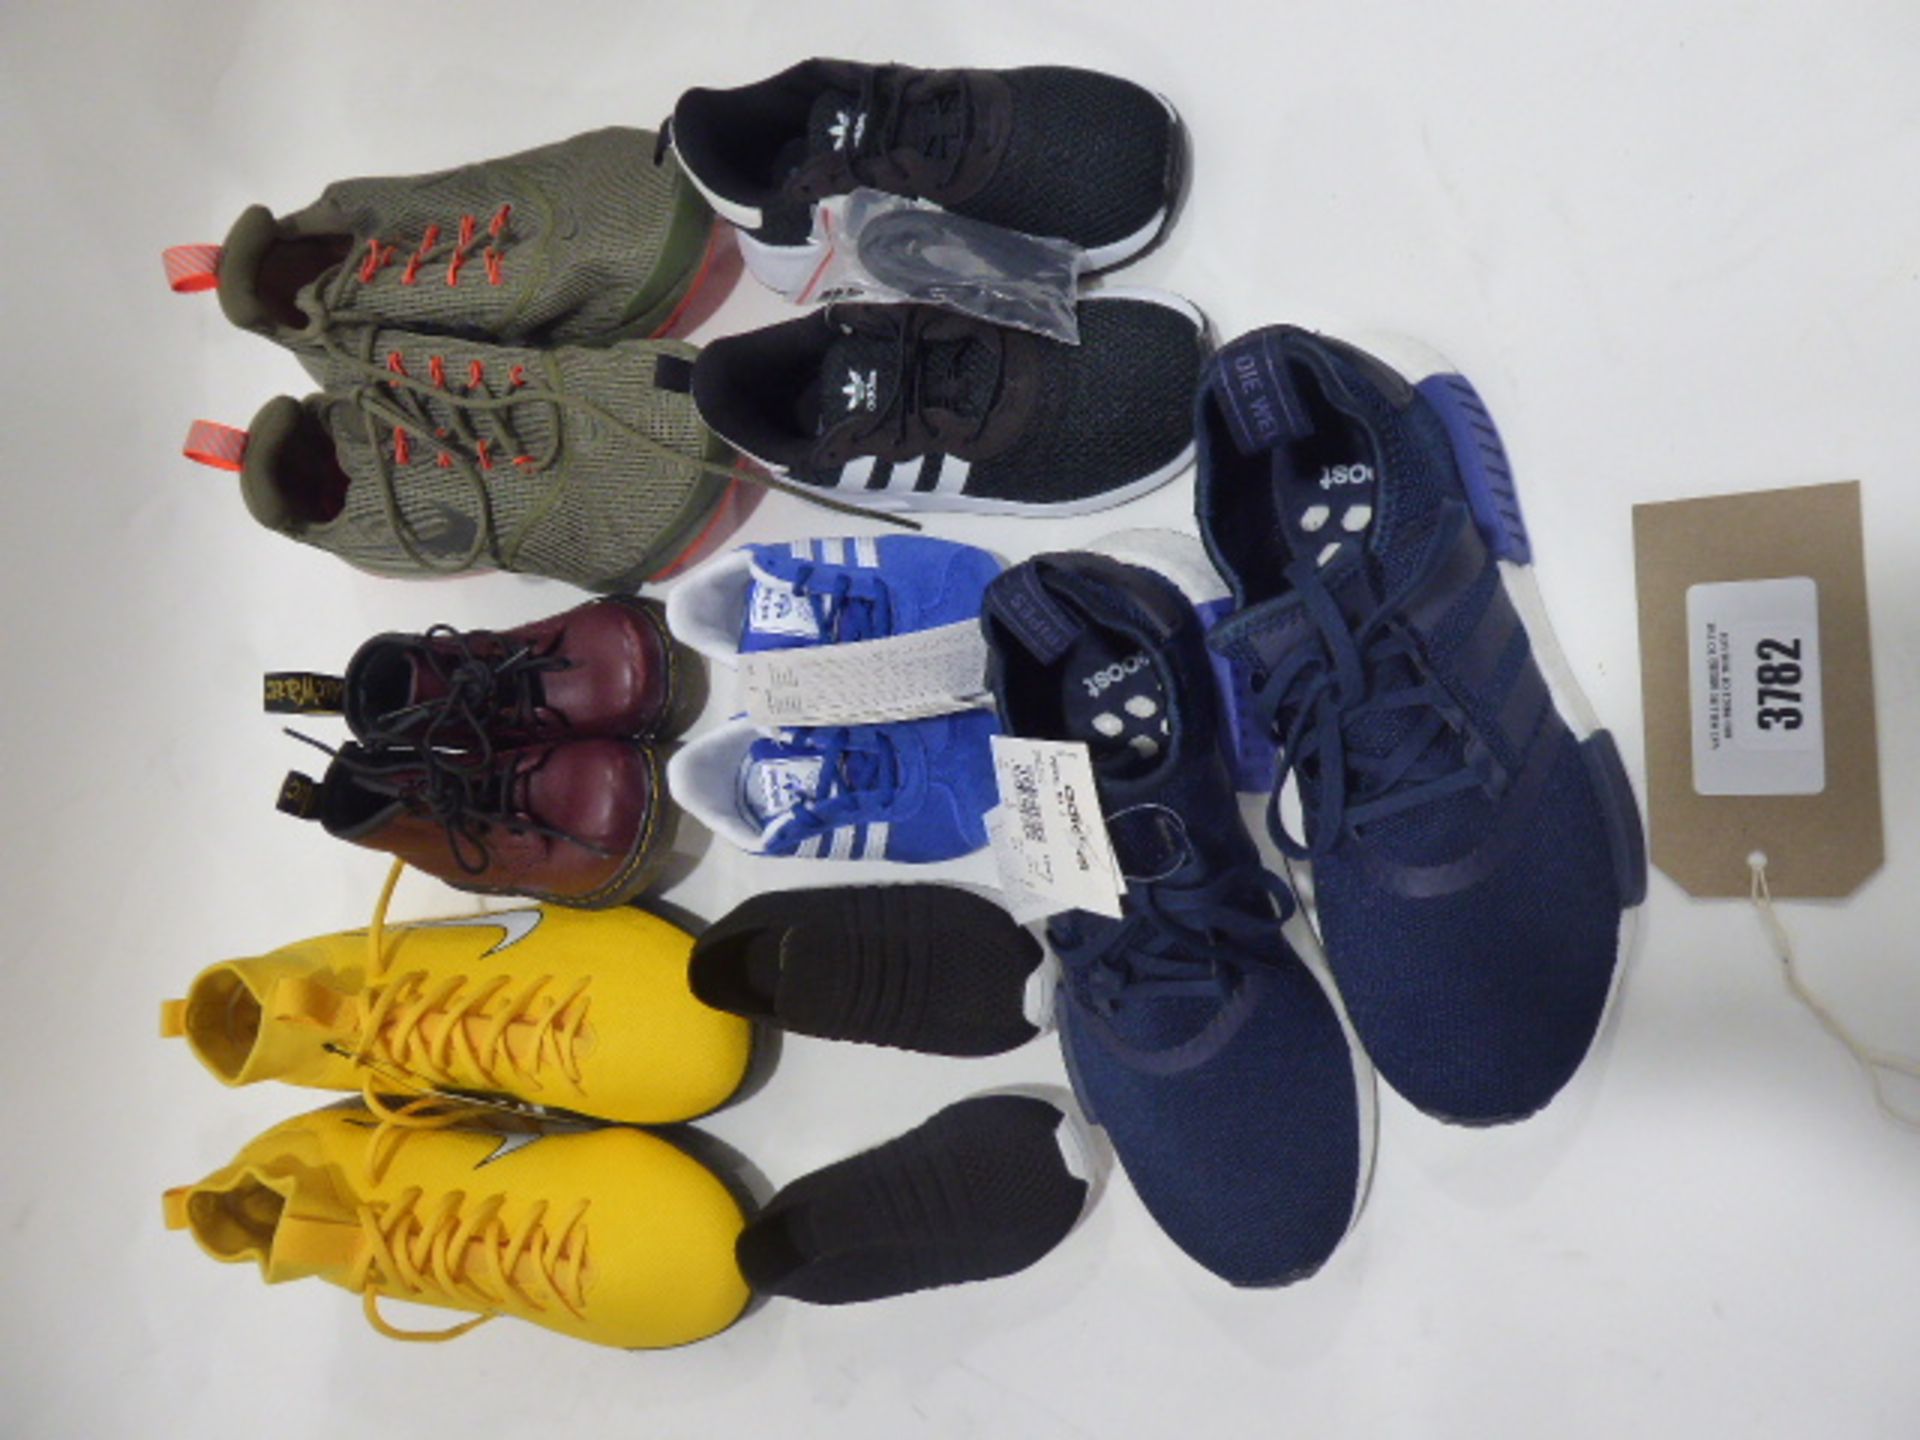 A small selection of intants/childrens branded footwear with brands including Adidas, Nike, Dr